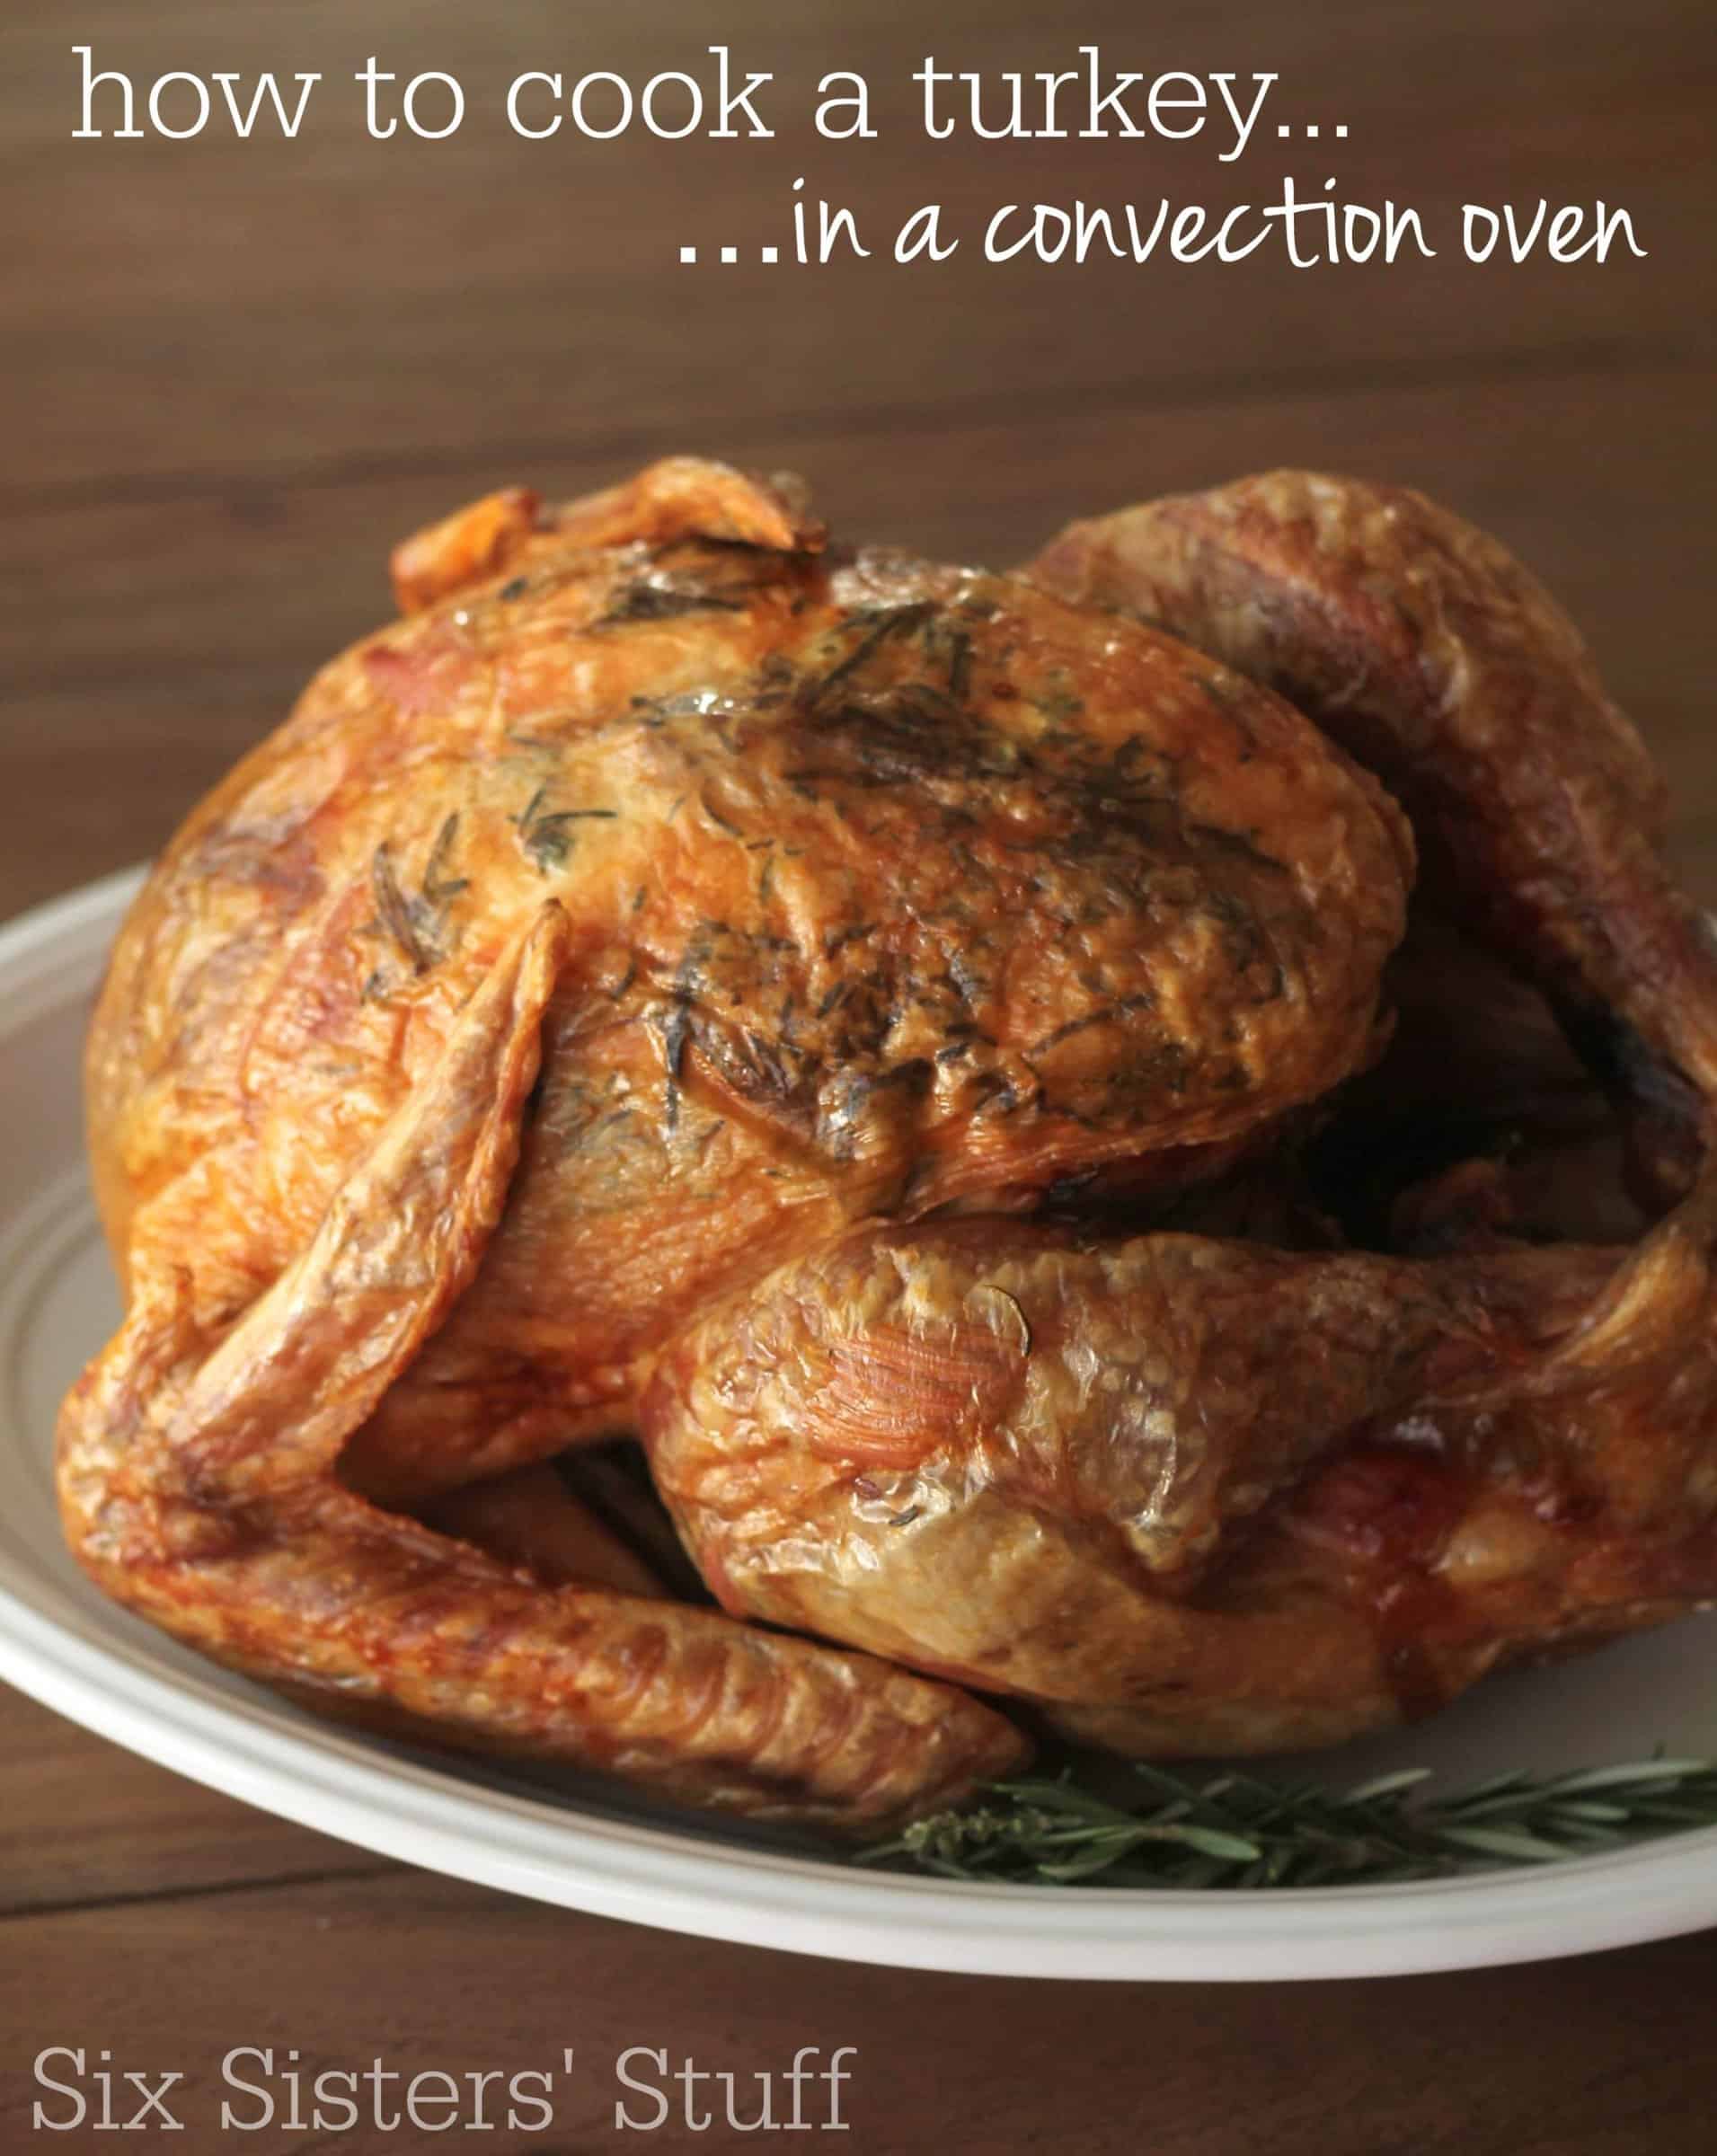 https://www.sixsistersstuff.com/wp-content/uploads/2019/11/How-to-Cook-a-Turkey-in-the-Convection-Oven.jpg